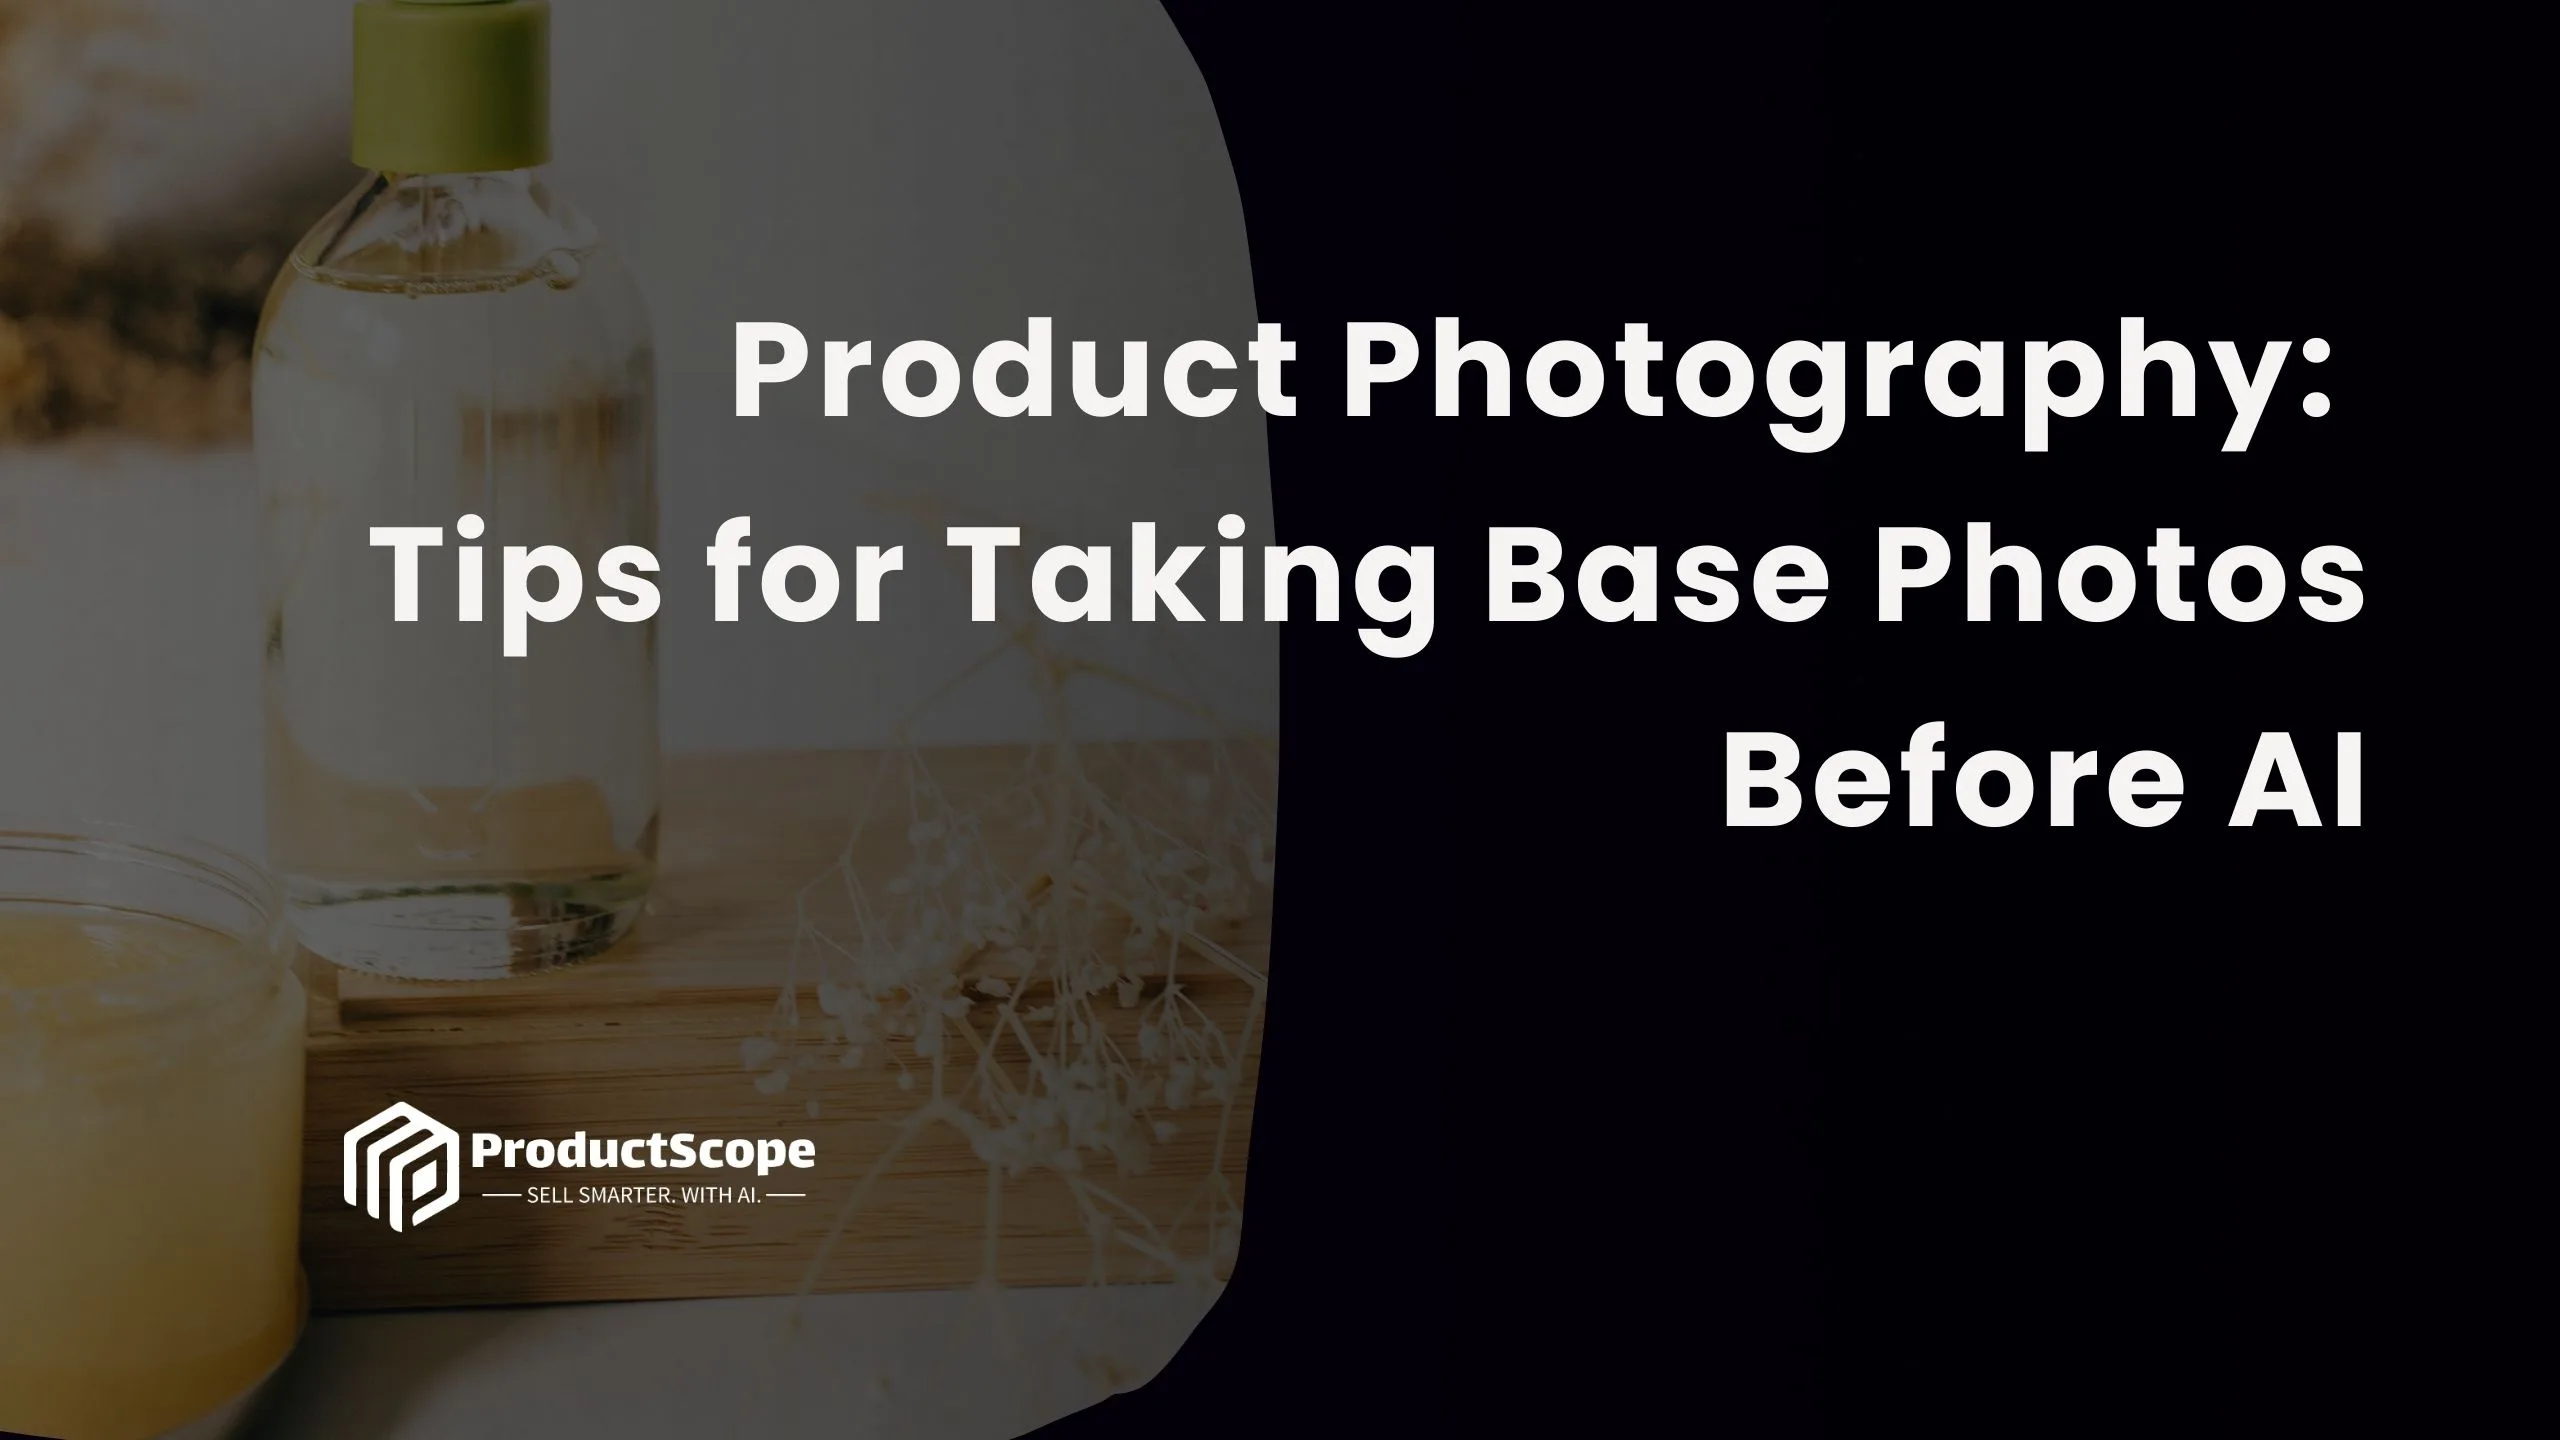 Product Photography: Tips for Taking Base Photos before AI